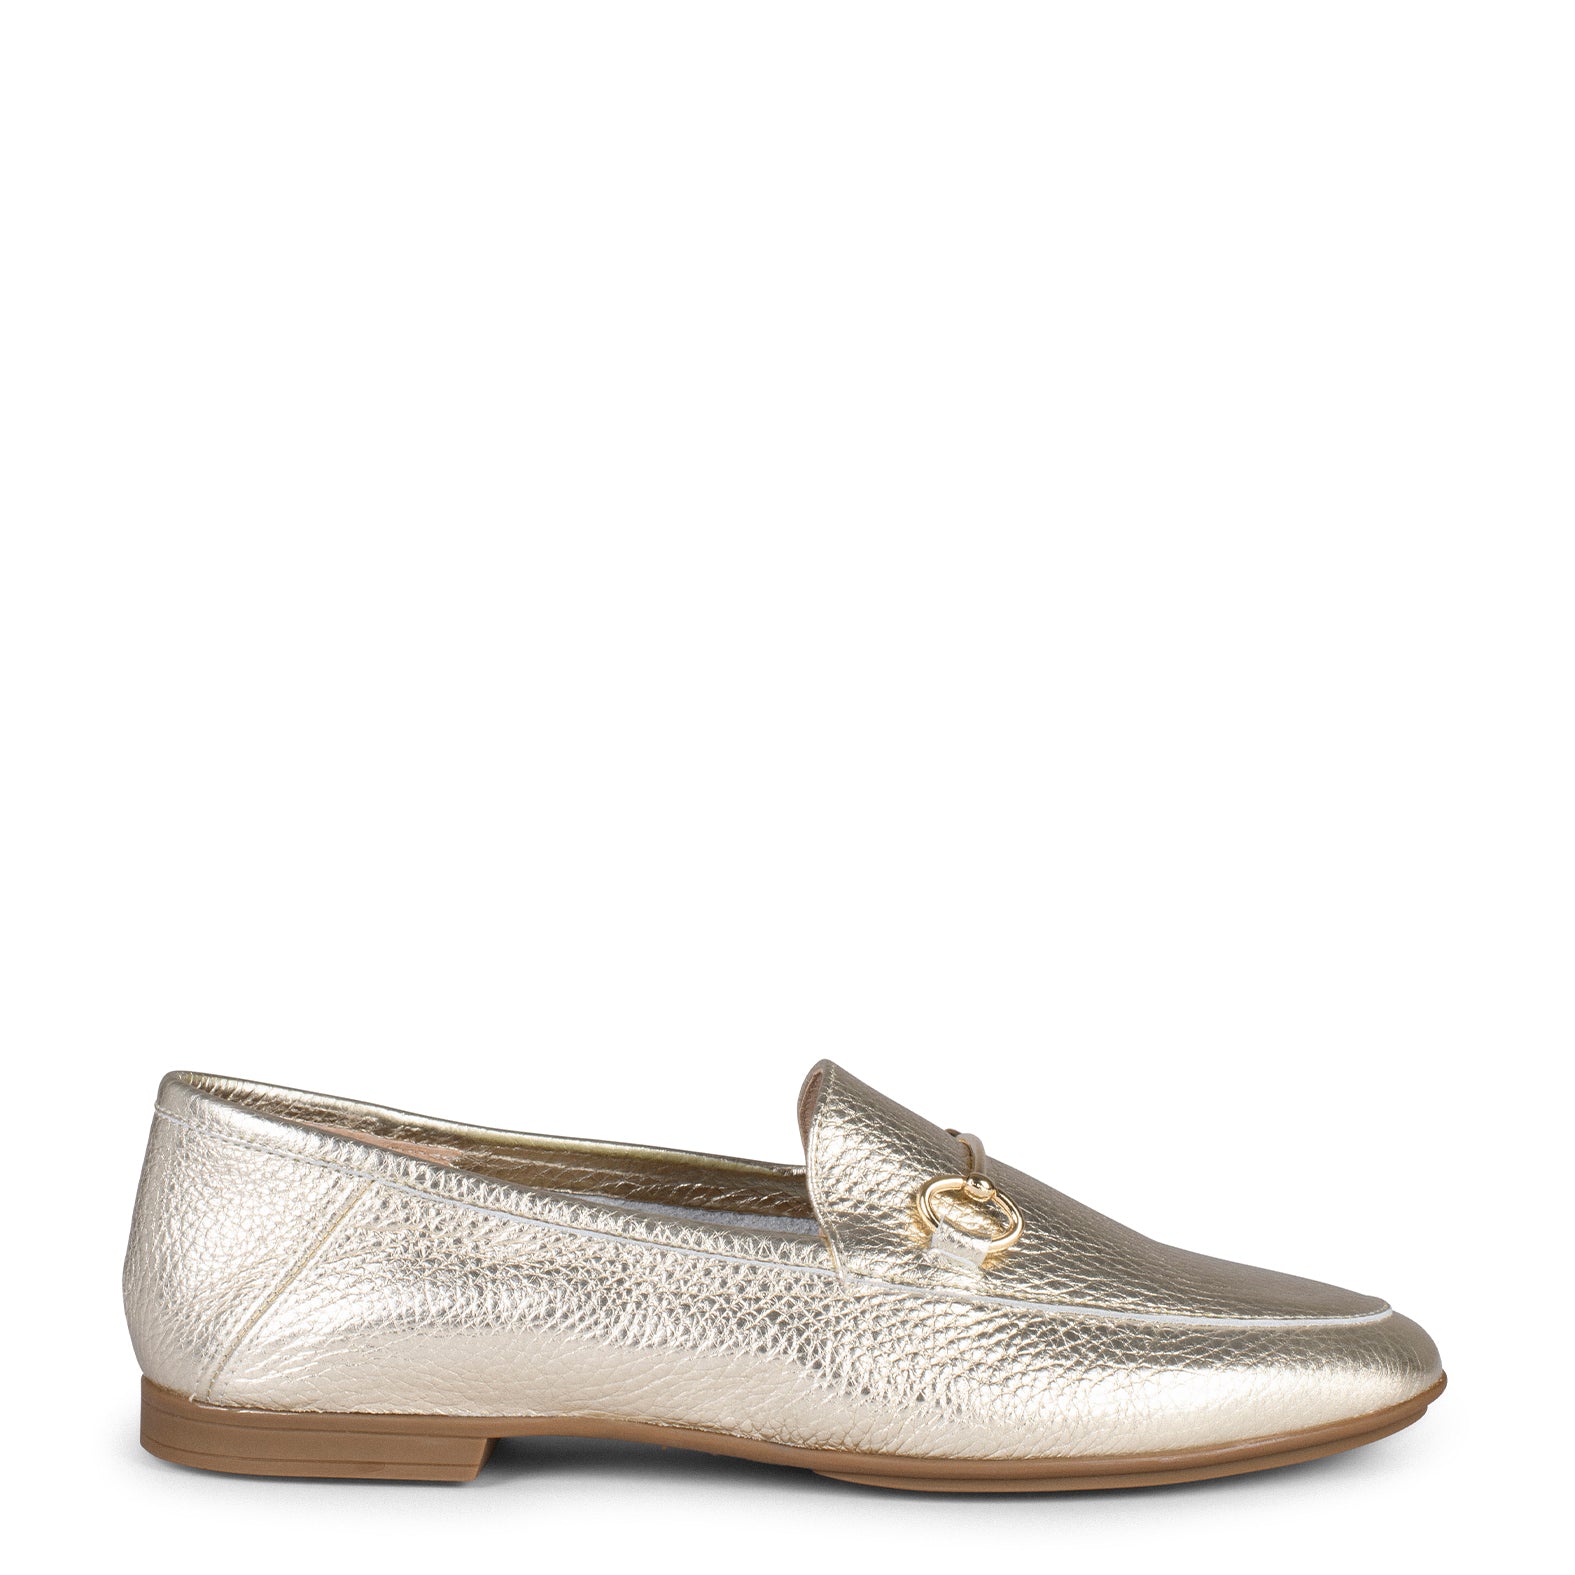 STYLE – GOLDEN moccasins with horsebit